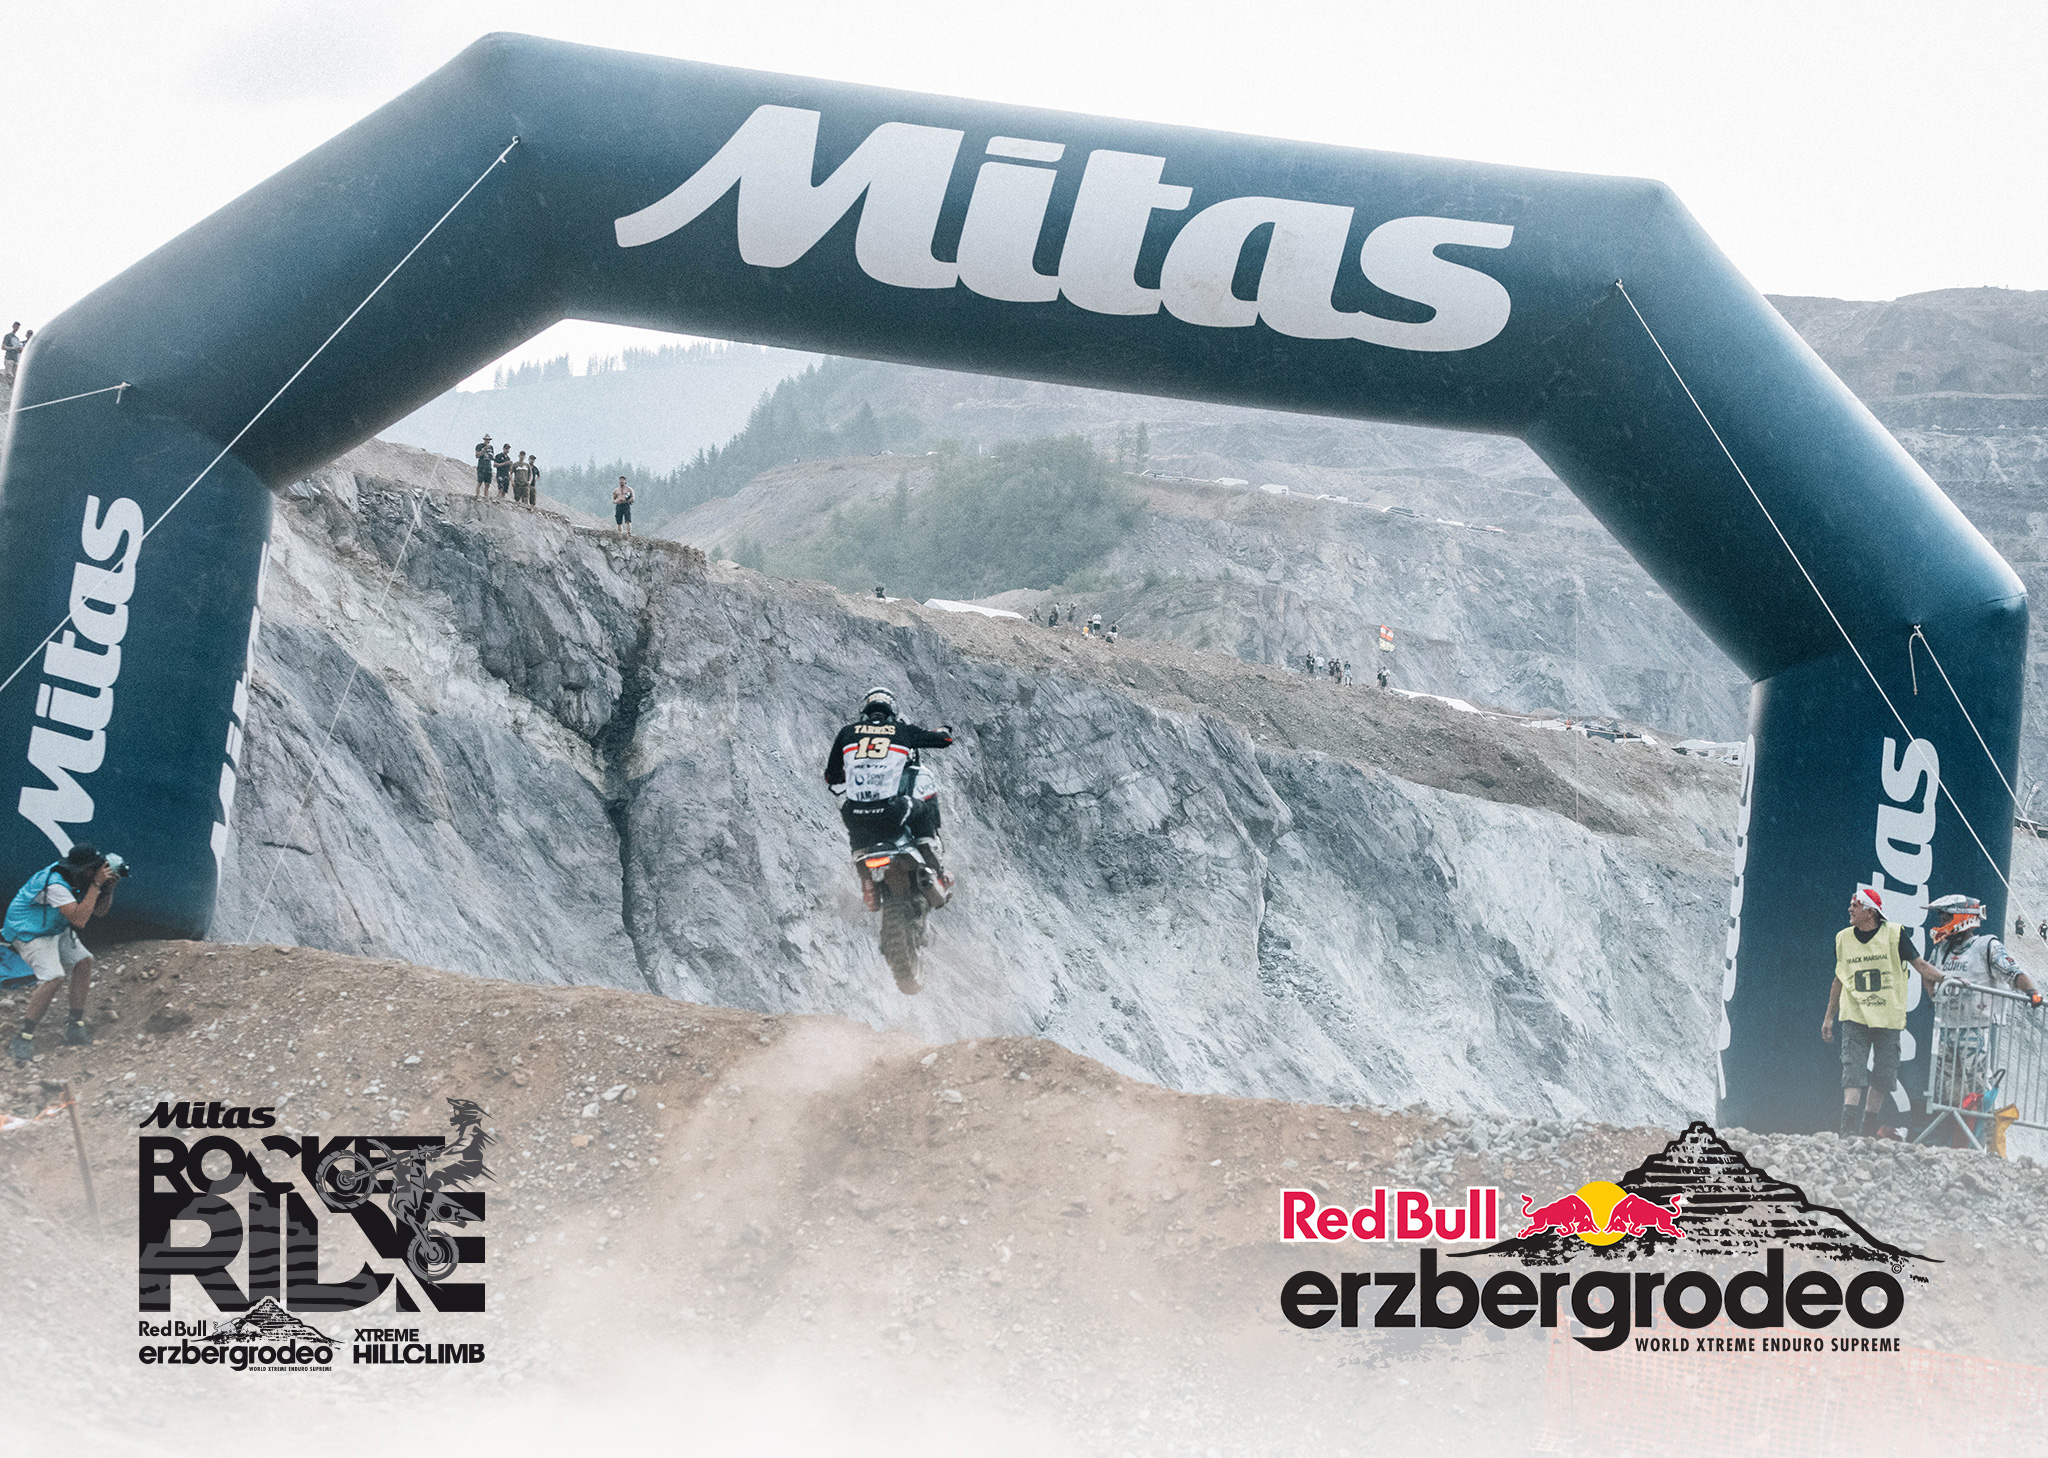 Mitas continues Red Bull Erzbergrodeo partnership